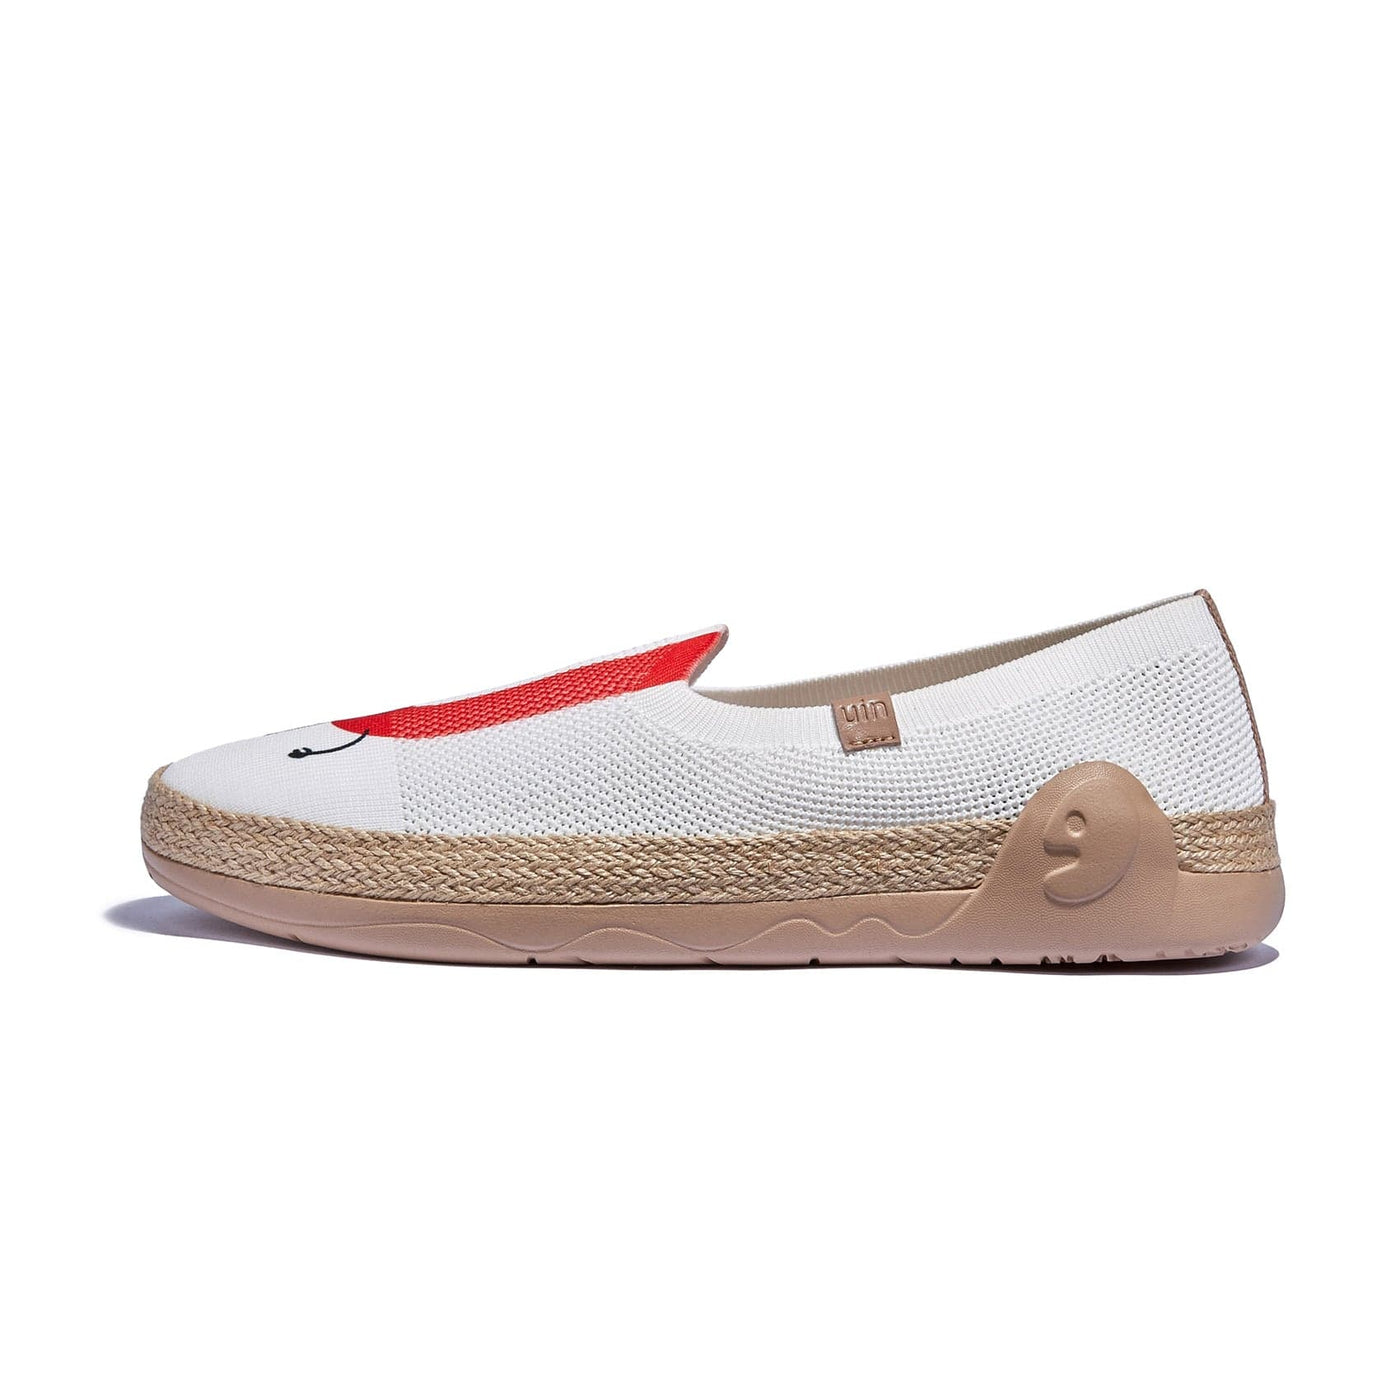 UIN Footwear Men Will You Say Yes Marbella II Men Canvas loafers